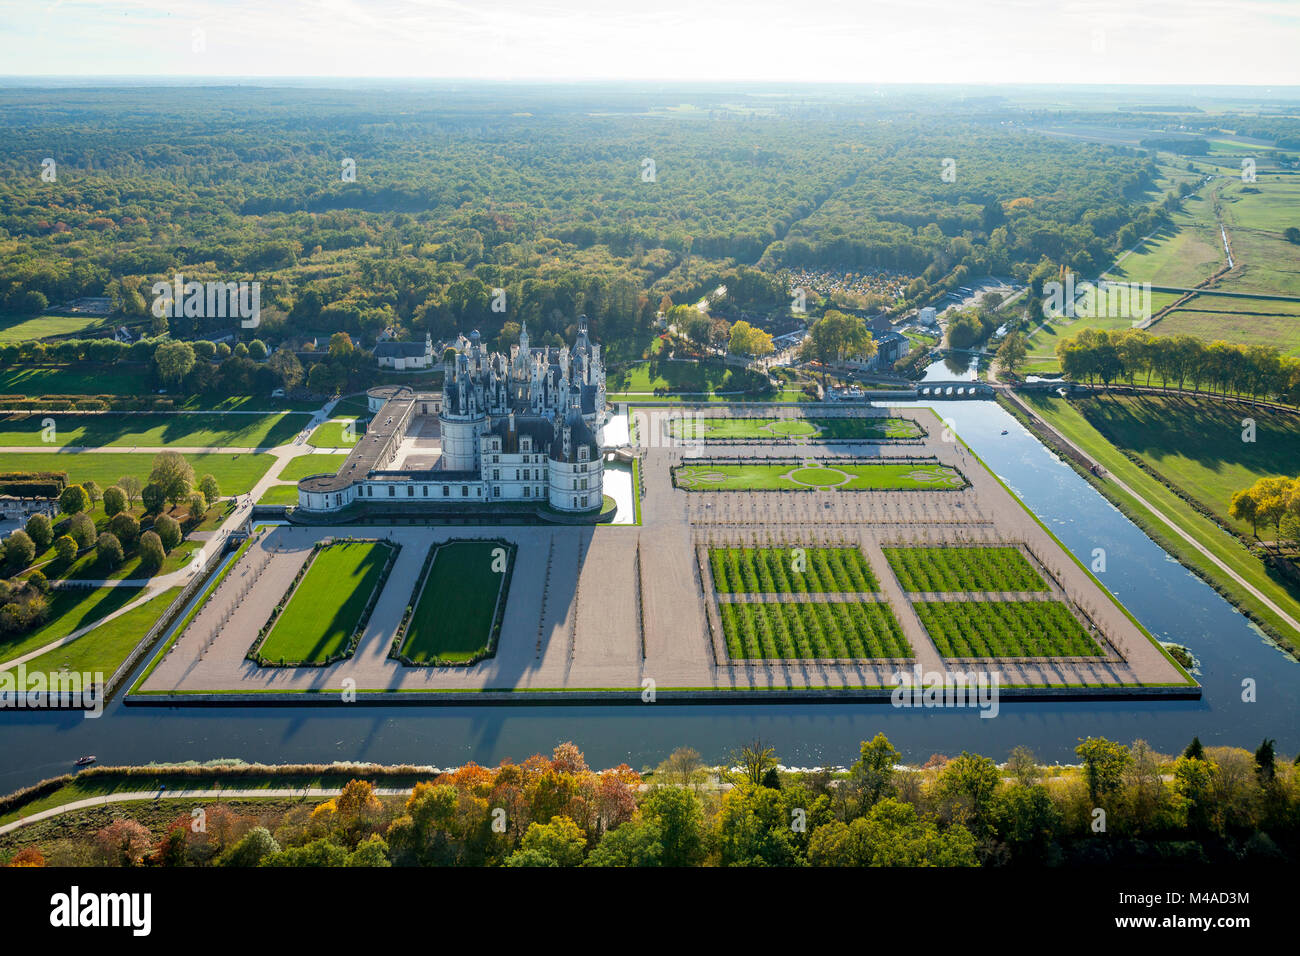 Aerial view of the Chateau de Chambord, a Renaissance style castle registered as a UNESCO World Heritage Site and National Historic Landmark (French Ò Stock Photo